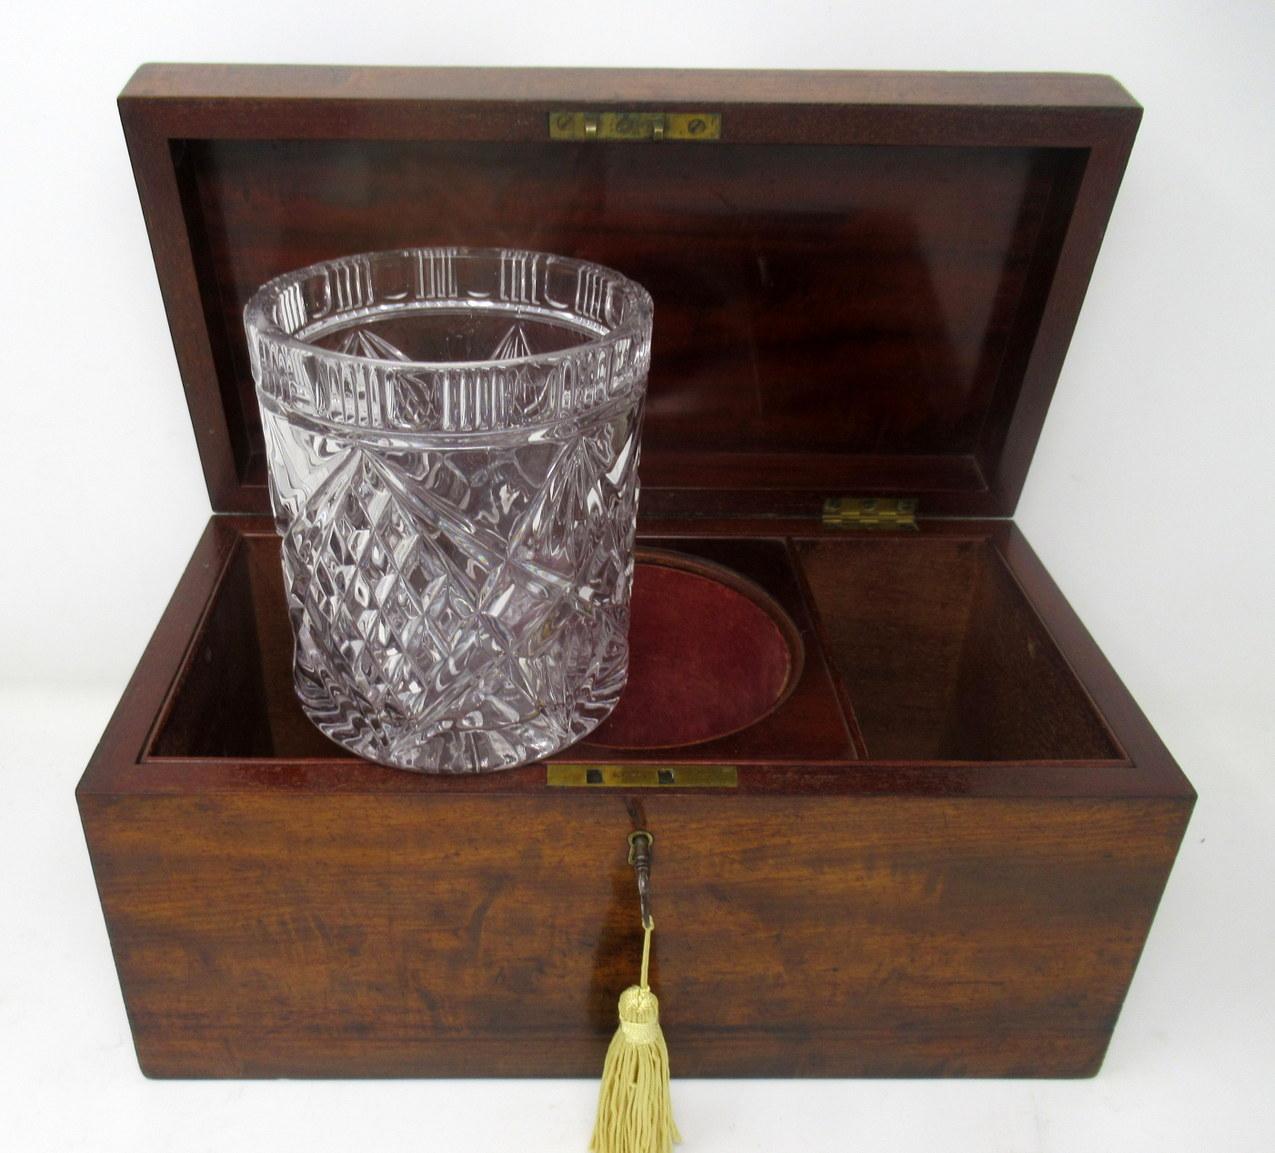 Polished Antique Flame Mahogany English Double Tea Caddy Box Regency Gillows Lancaster